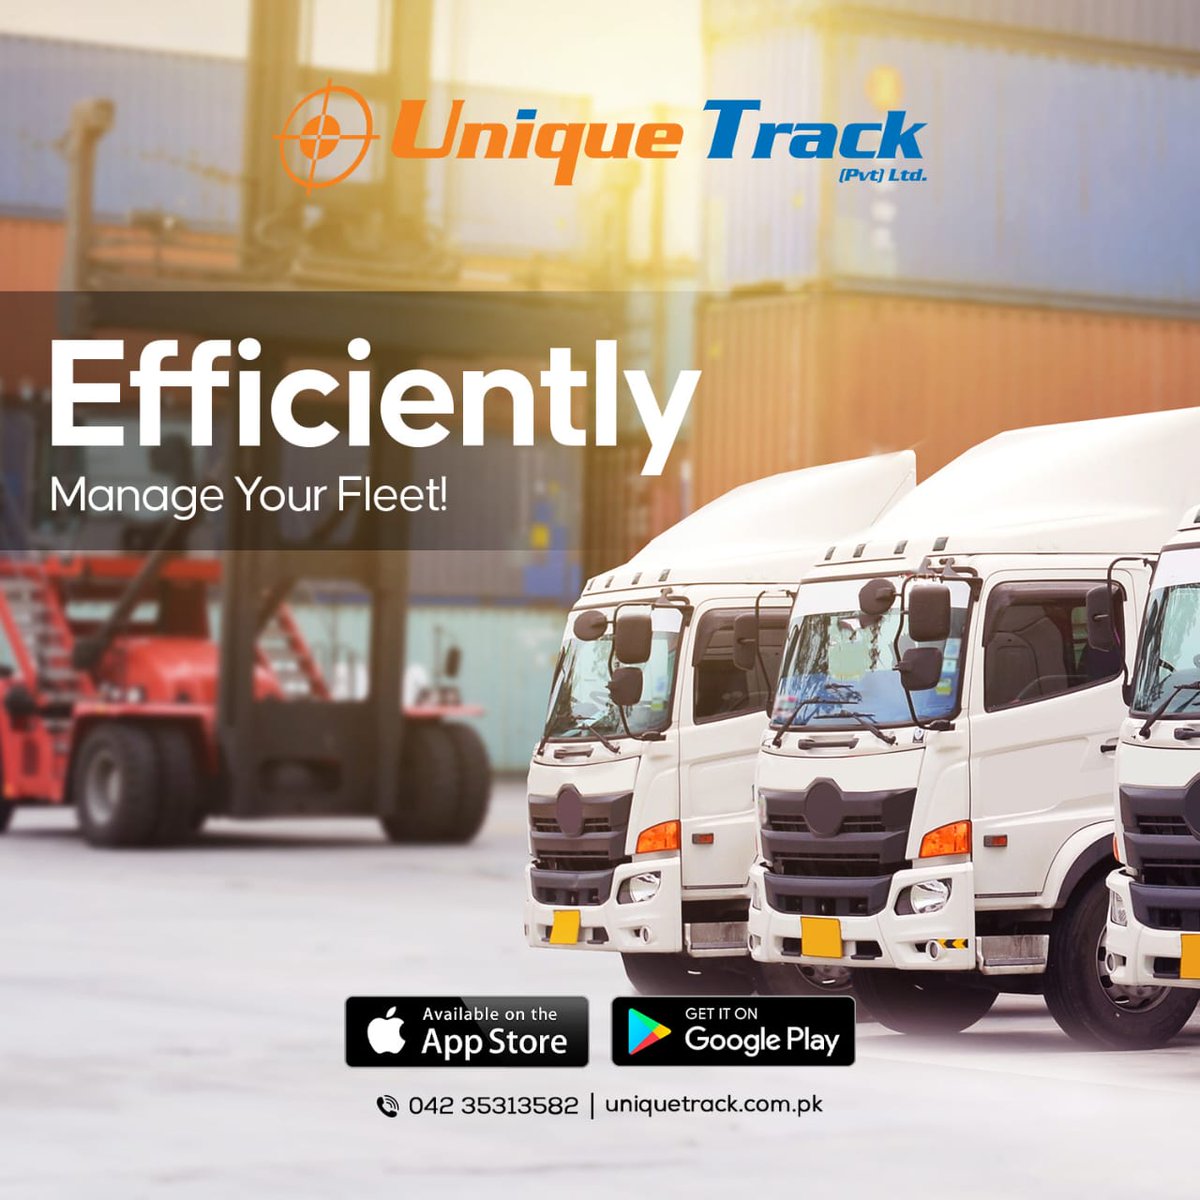 Streamline your fleet management processes and stay in control of your vehicles with the Unique Track Car Tracking Mobile App.
📱 : 03234444434
🌐 : uniquetrack.com.pk
#UniqueTrack #FleetManagement #CarTracking #MobileApp #RealTimeInformation #Efficiency #Productivity